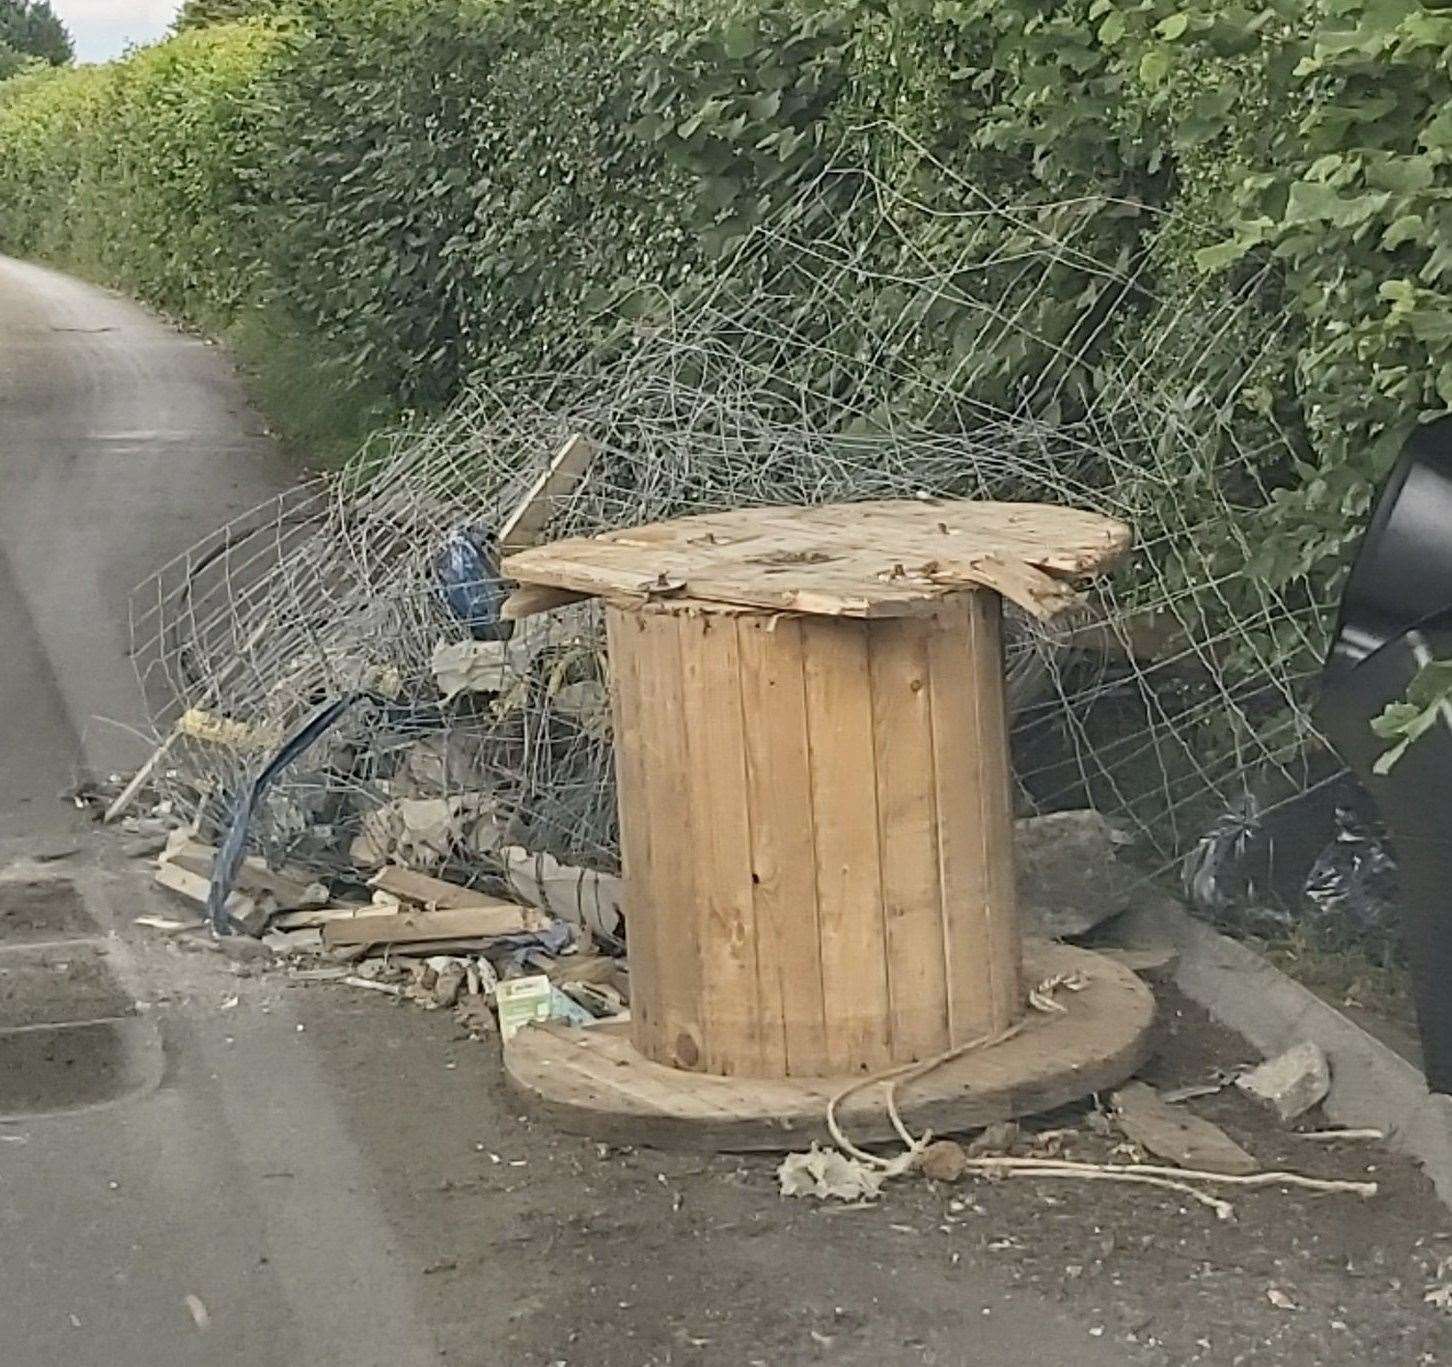 A huge wooden spool was fly-tipped in Gravesham. Picture: Kent Police